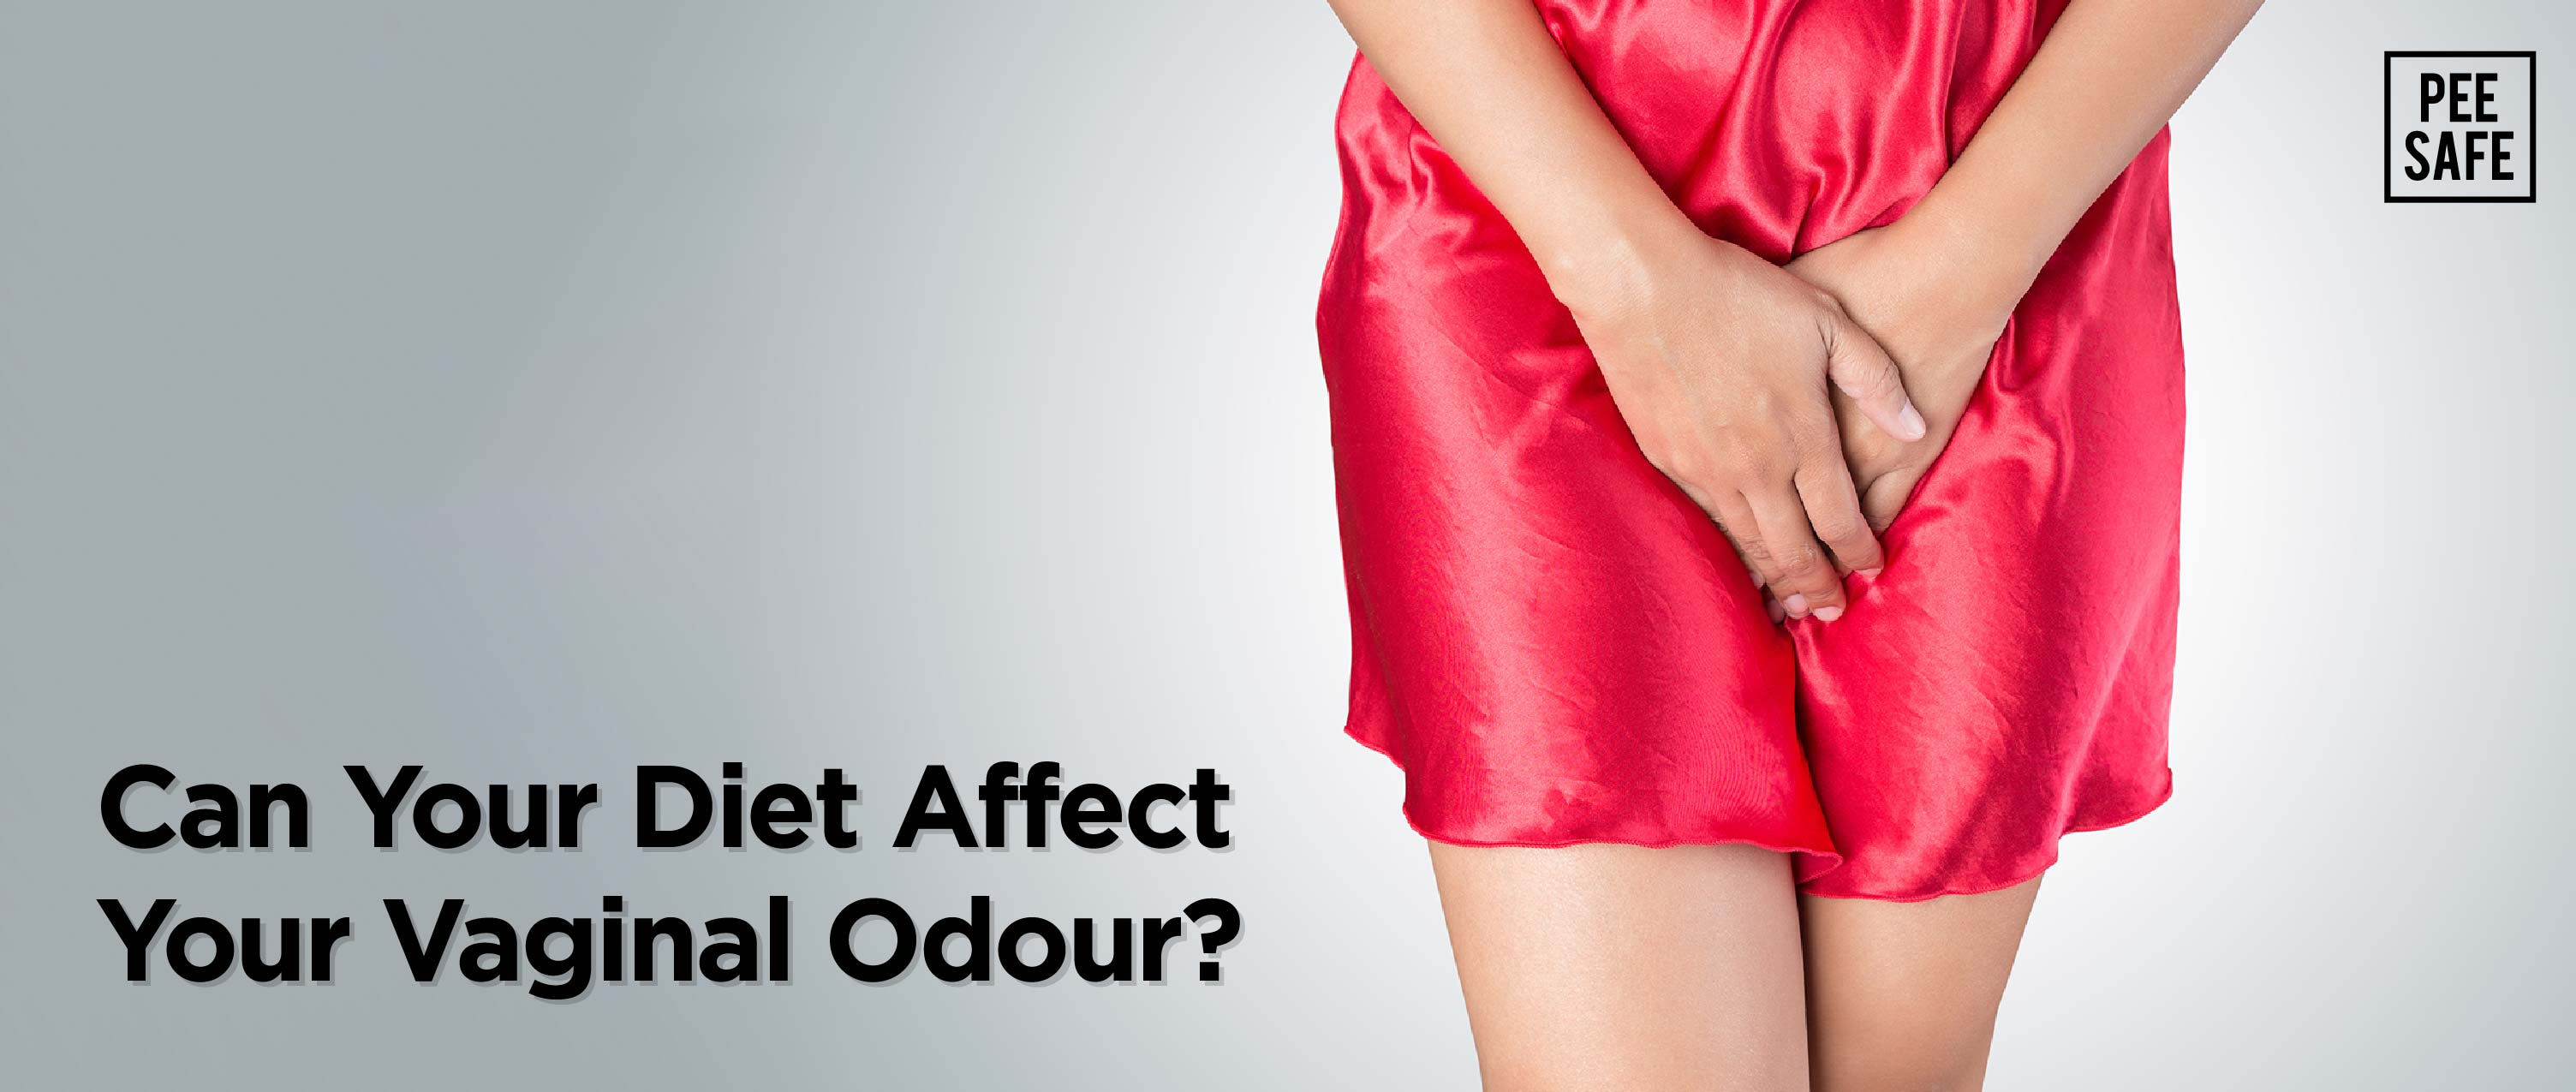 Can Your Diet Affect Your Vaginal Odour?